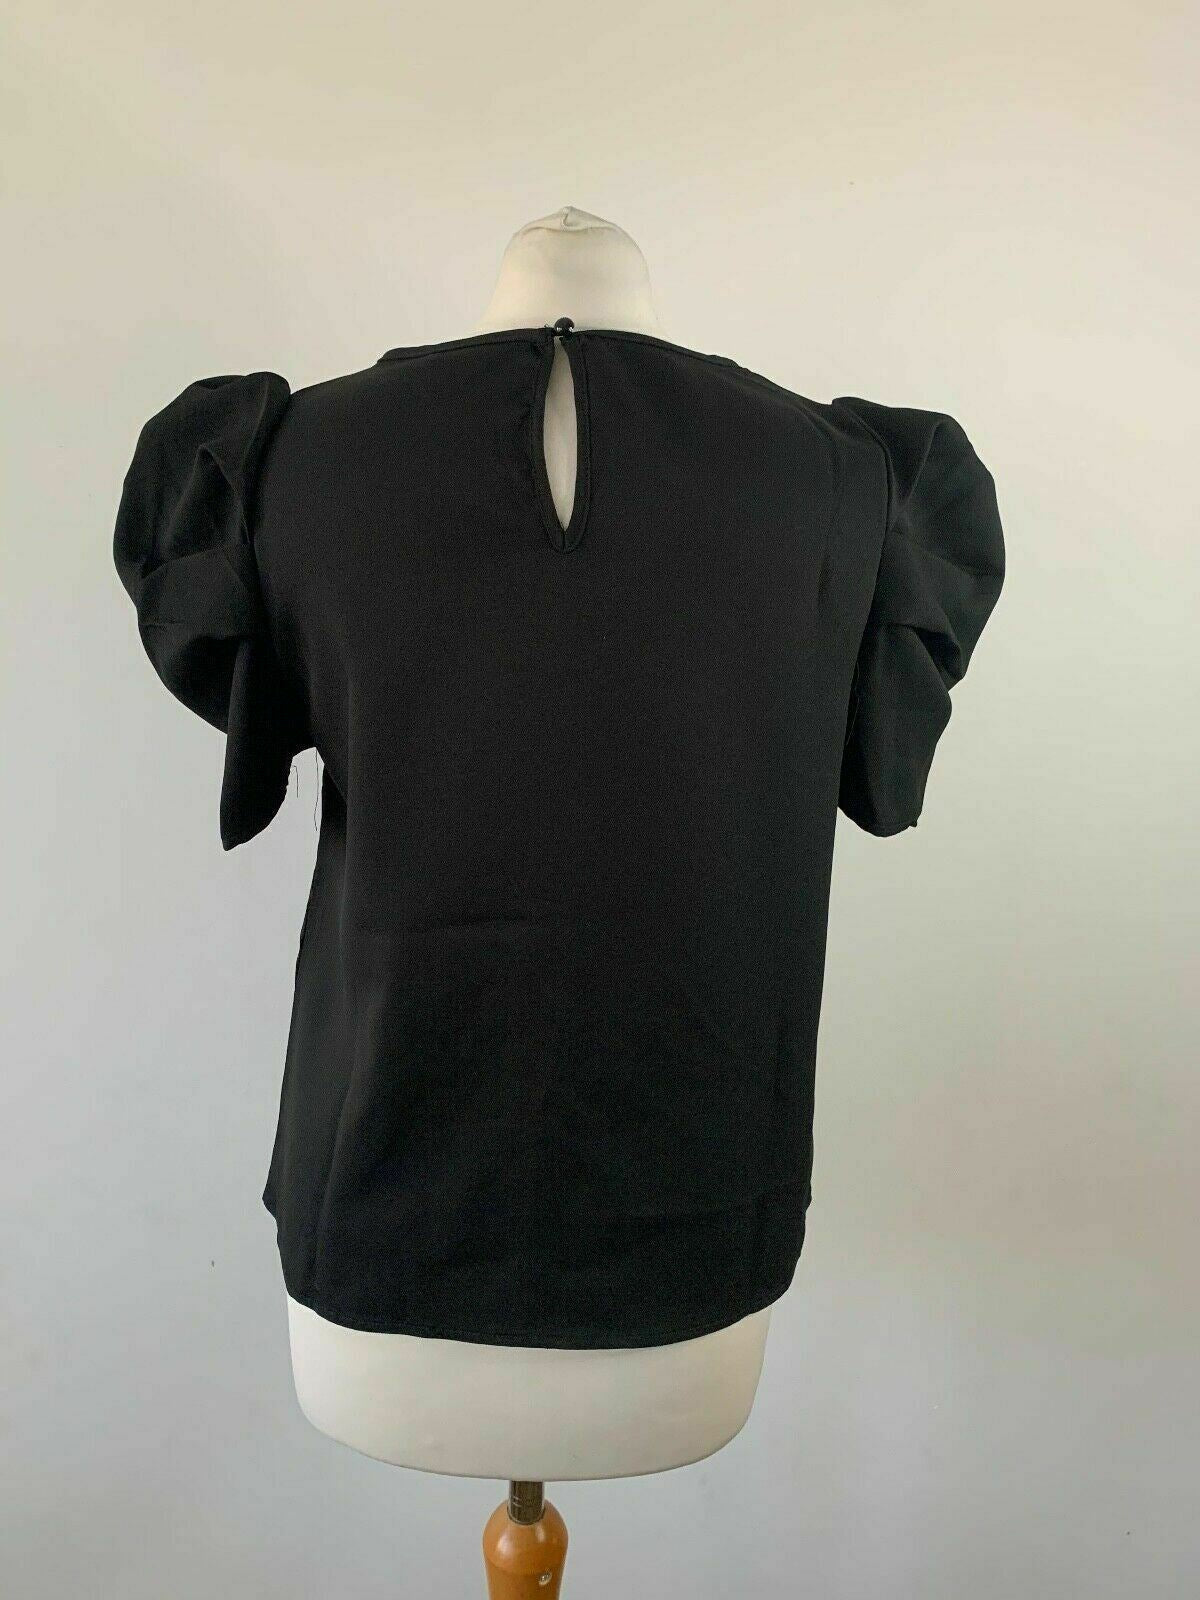 SHEIN Black Blouse Puffed Sleeves Size S 8